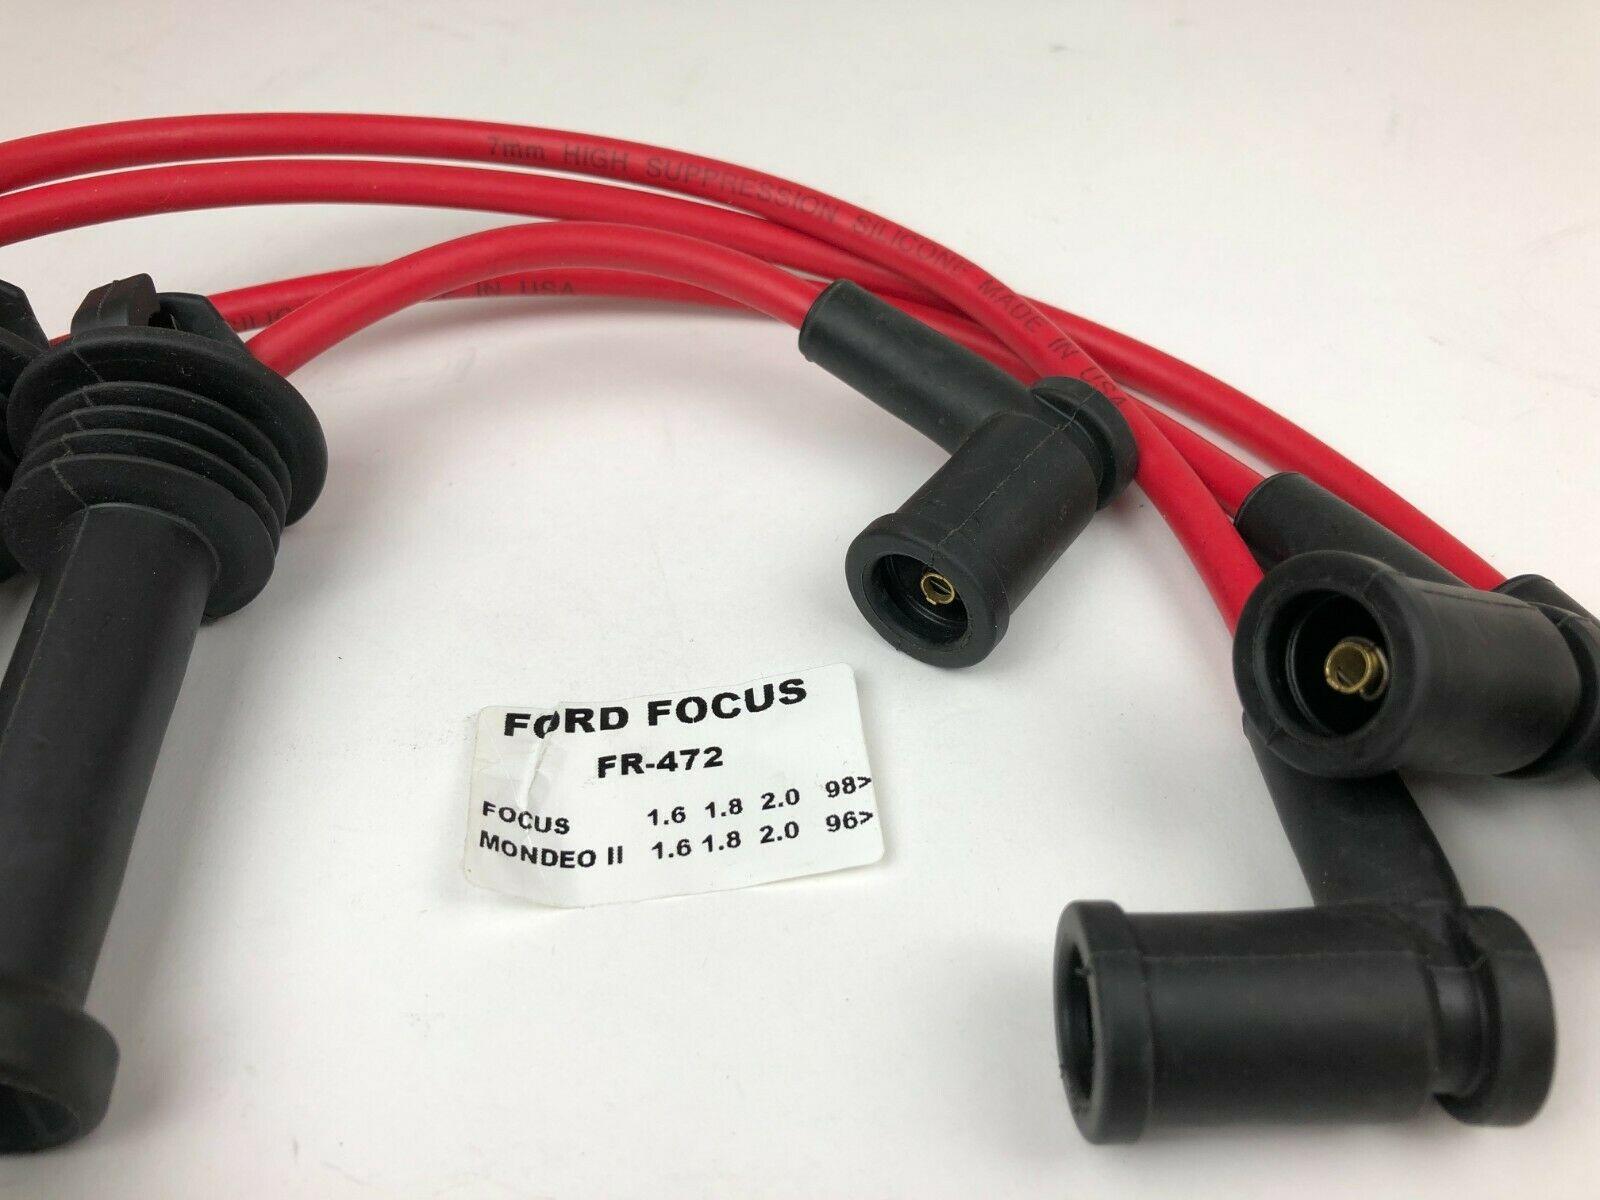 RED HT Spark Ignition Lead Cable SET for FORD Focus and Mondeo II 1.6 1.8 2.0